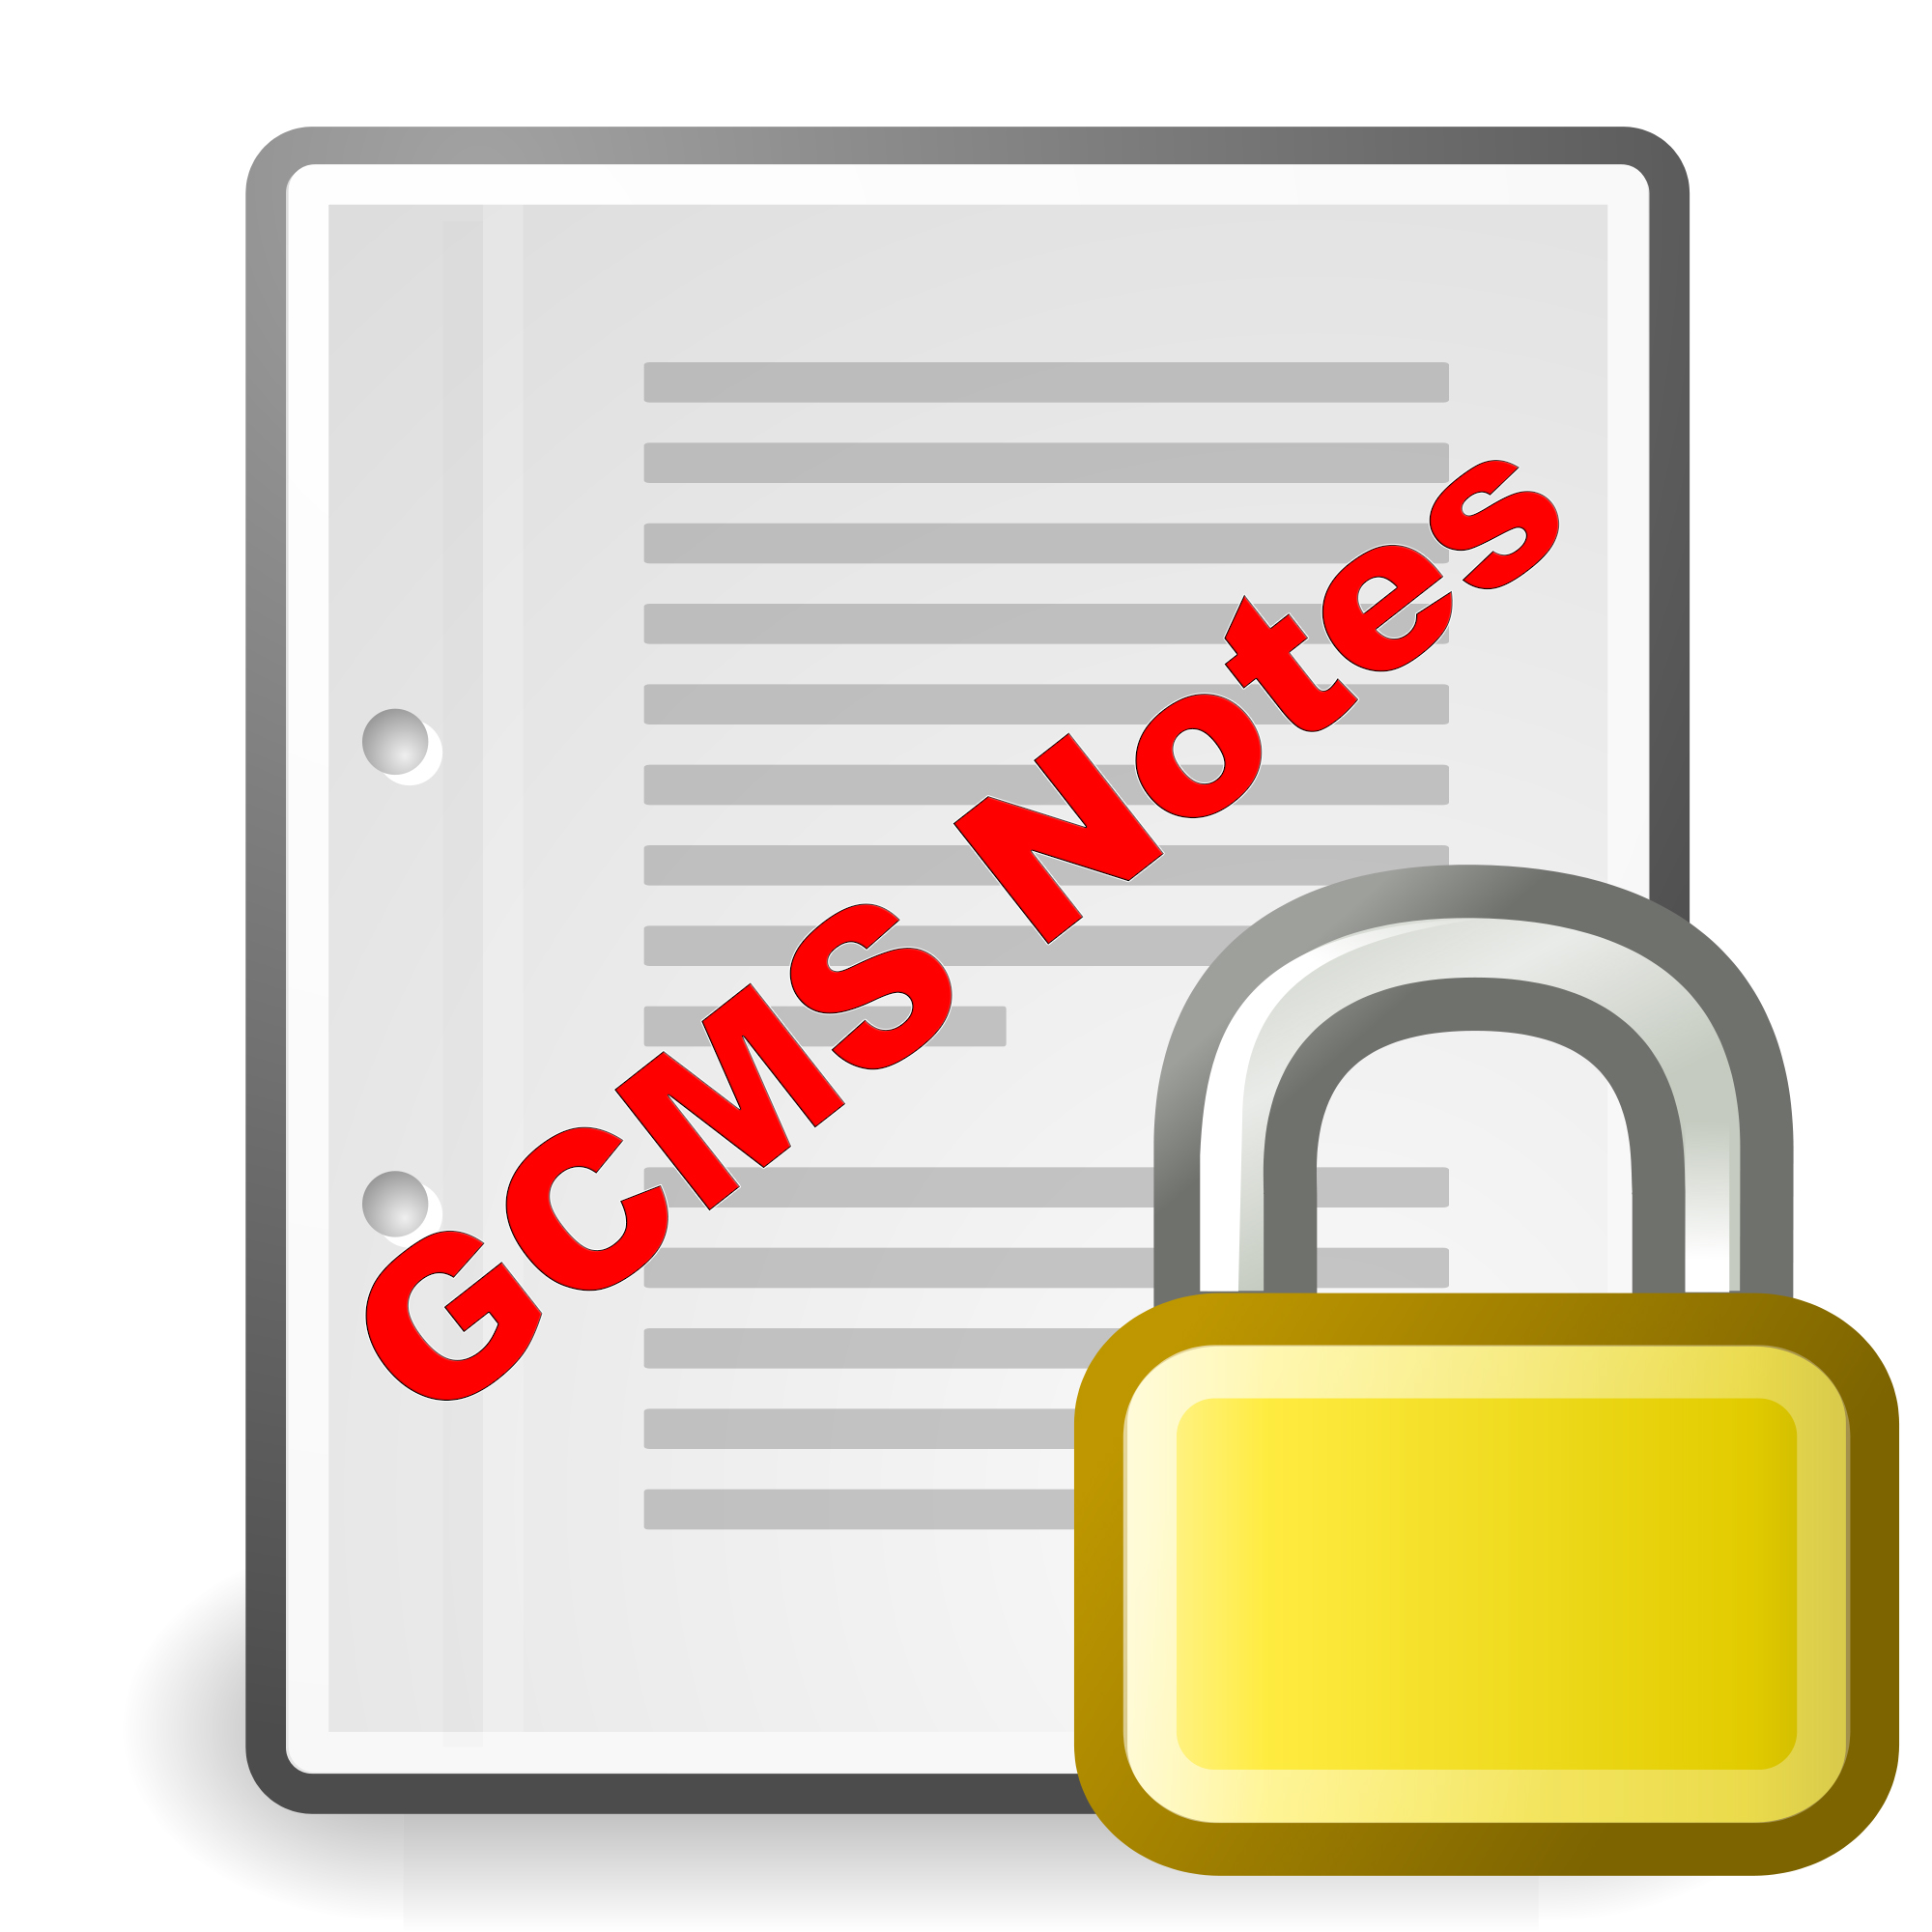 GCMS notes file